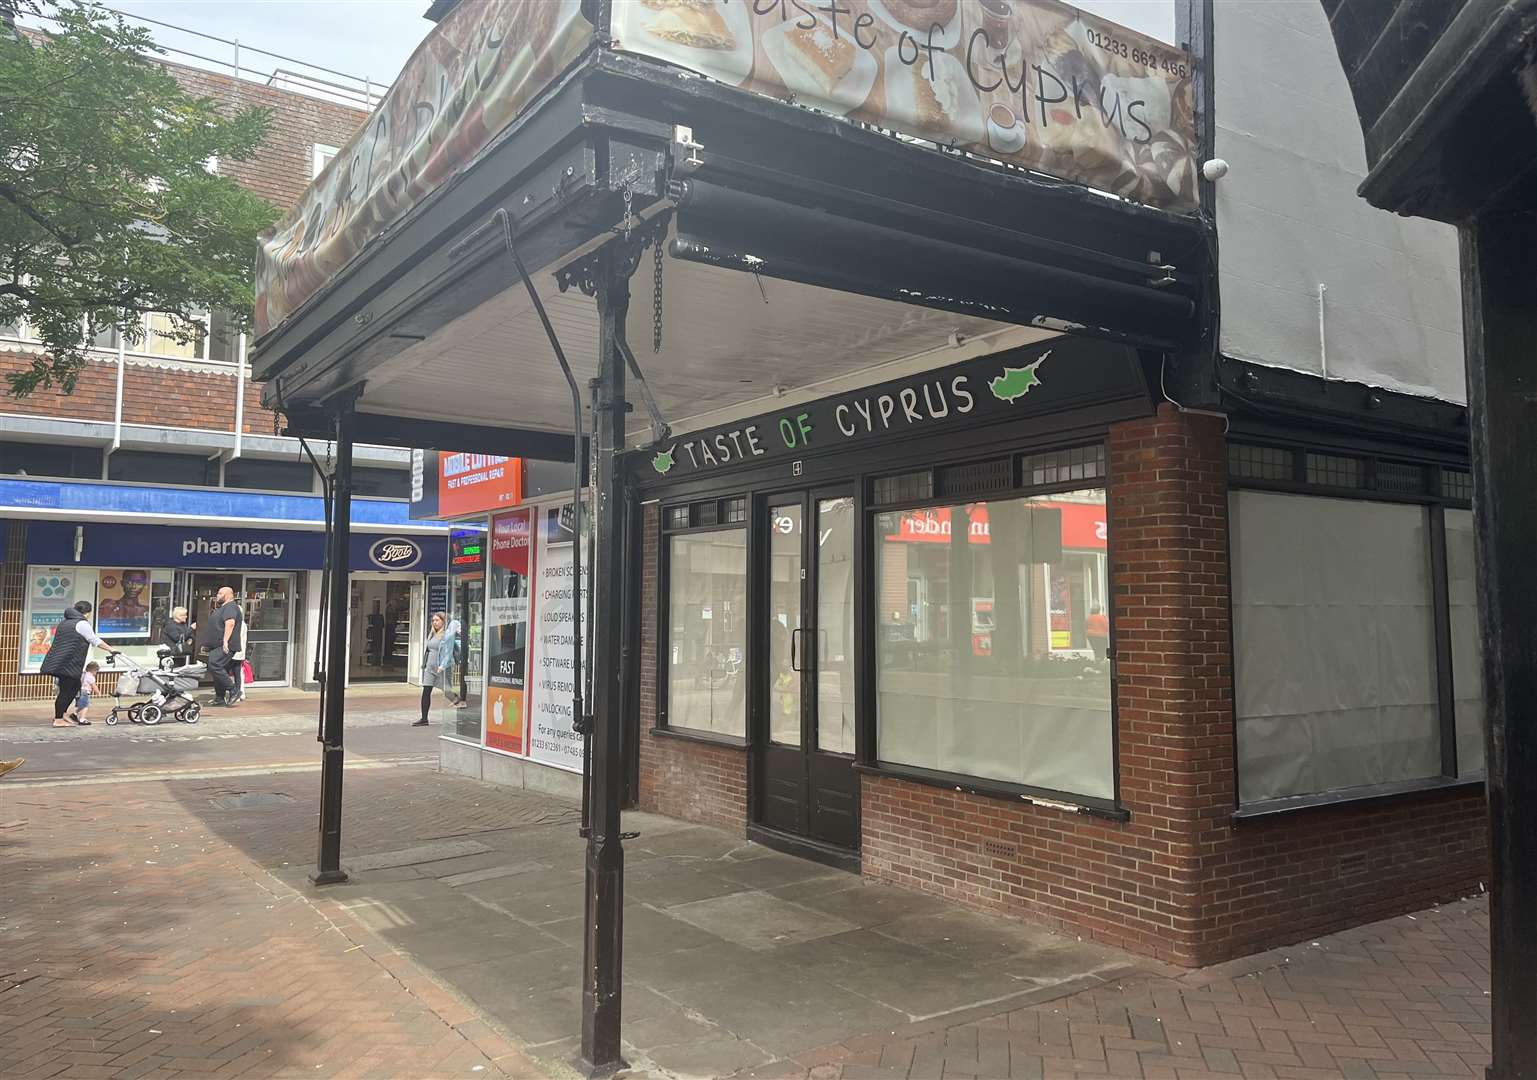 Taste of Cyprus opened last summer but has now been boarded up